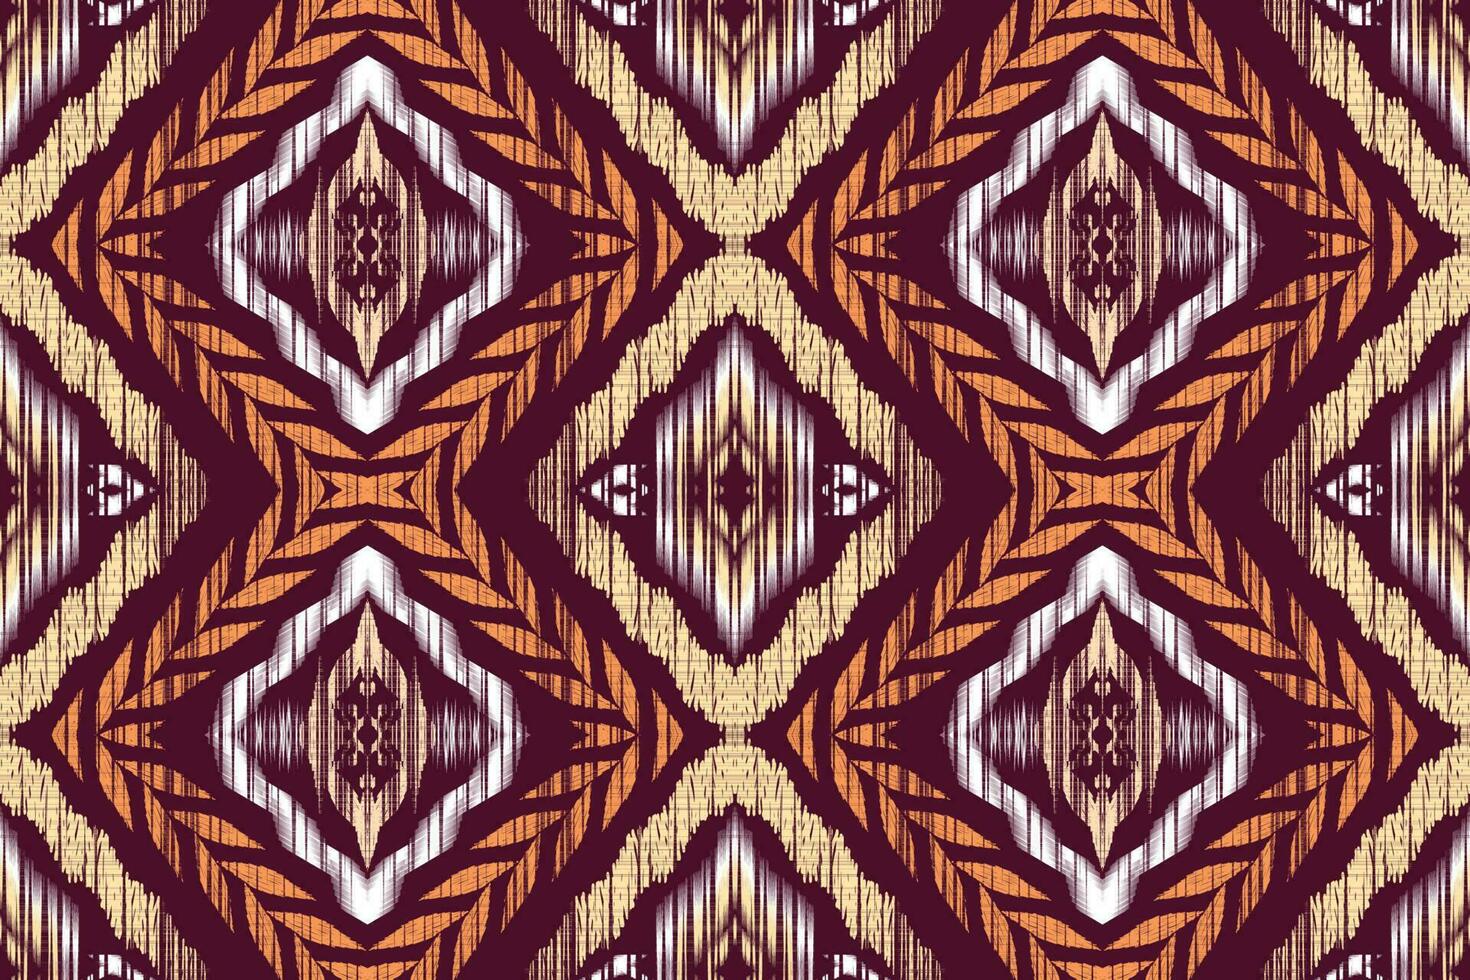 Ikat Figure aztec embroidery style. Geometric ethnic oriental traditional art pattern.Design for ethnic background,wallpaper,fashion,clothing,wrapping,fabric,element,sarong,graphic,vector illustration vector